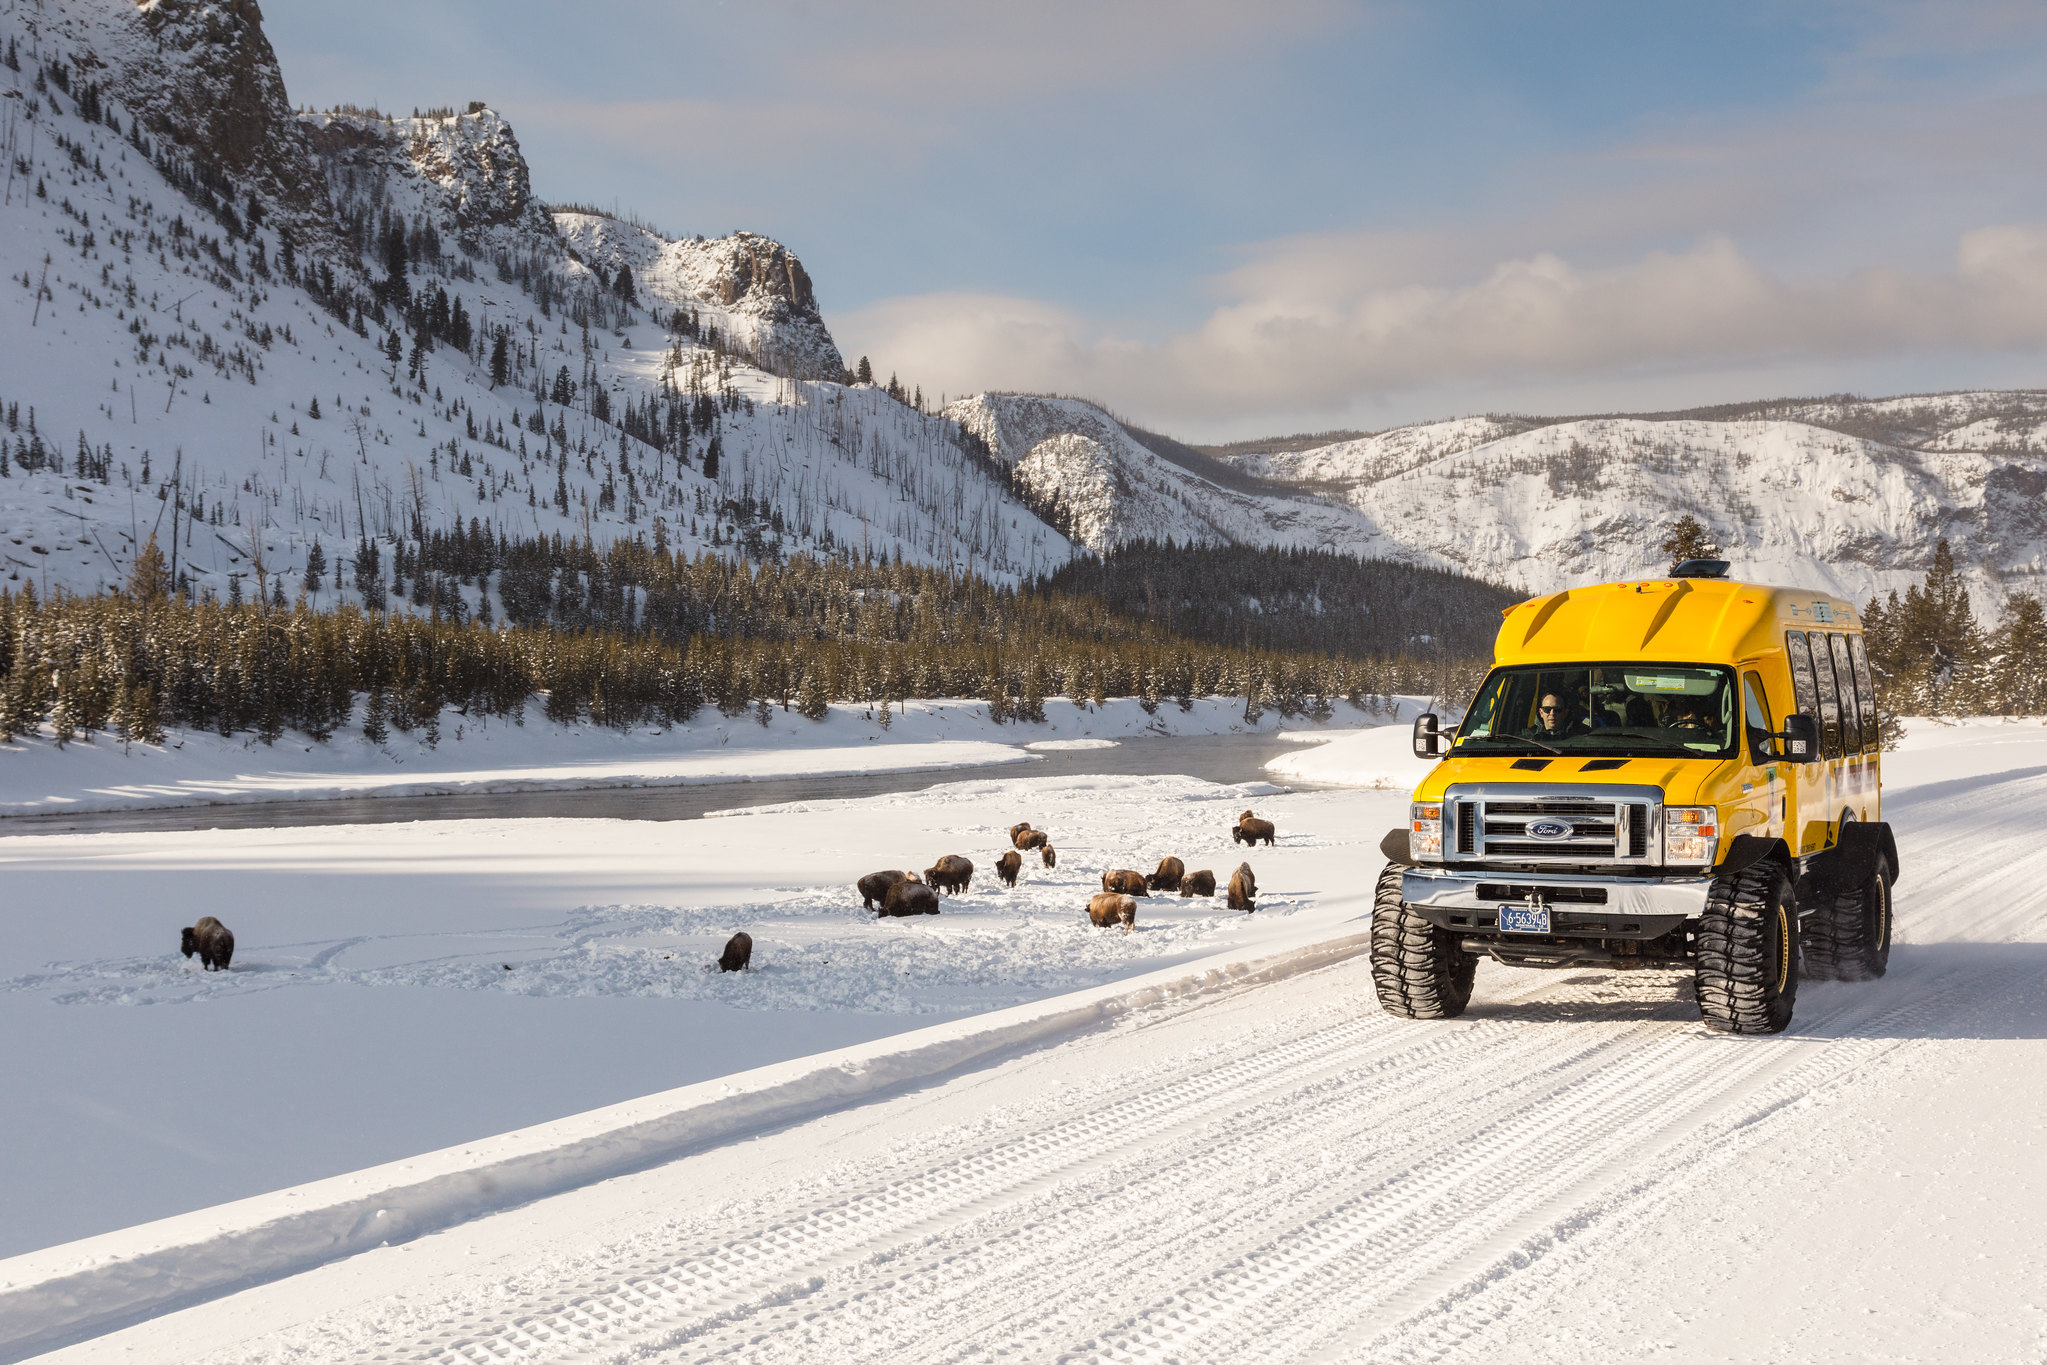 Snowcoach along the Madison River with bison